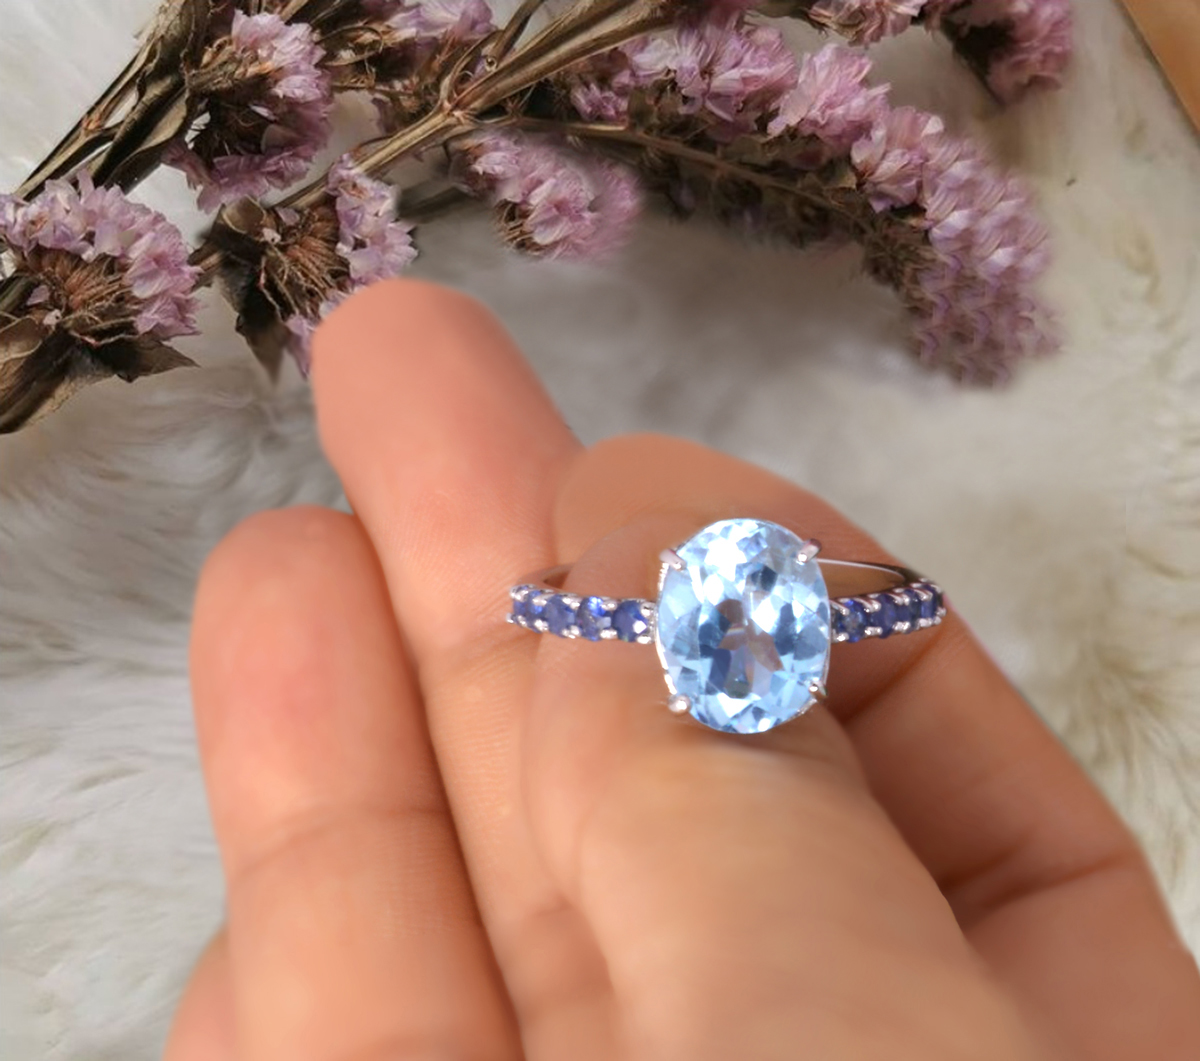 Sky Blue Topaz Ring With Blue Sapphire Gemstones ,natural Gemstones, 925 Sterling Silver Jewelry For Her December Birthday, Jewelry Thailand